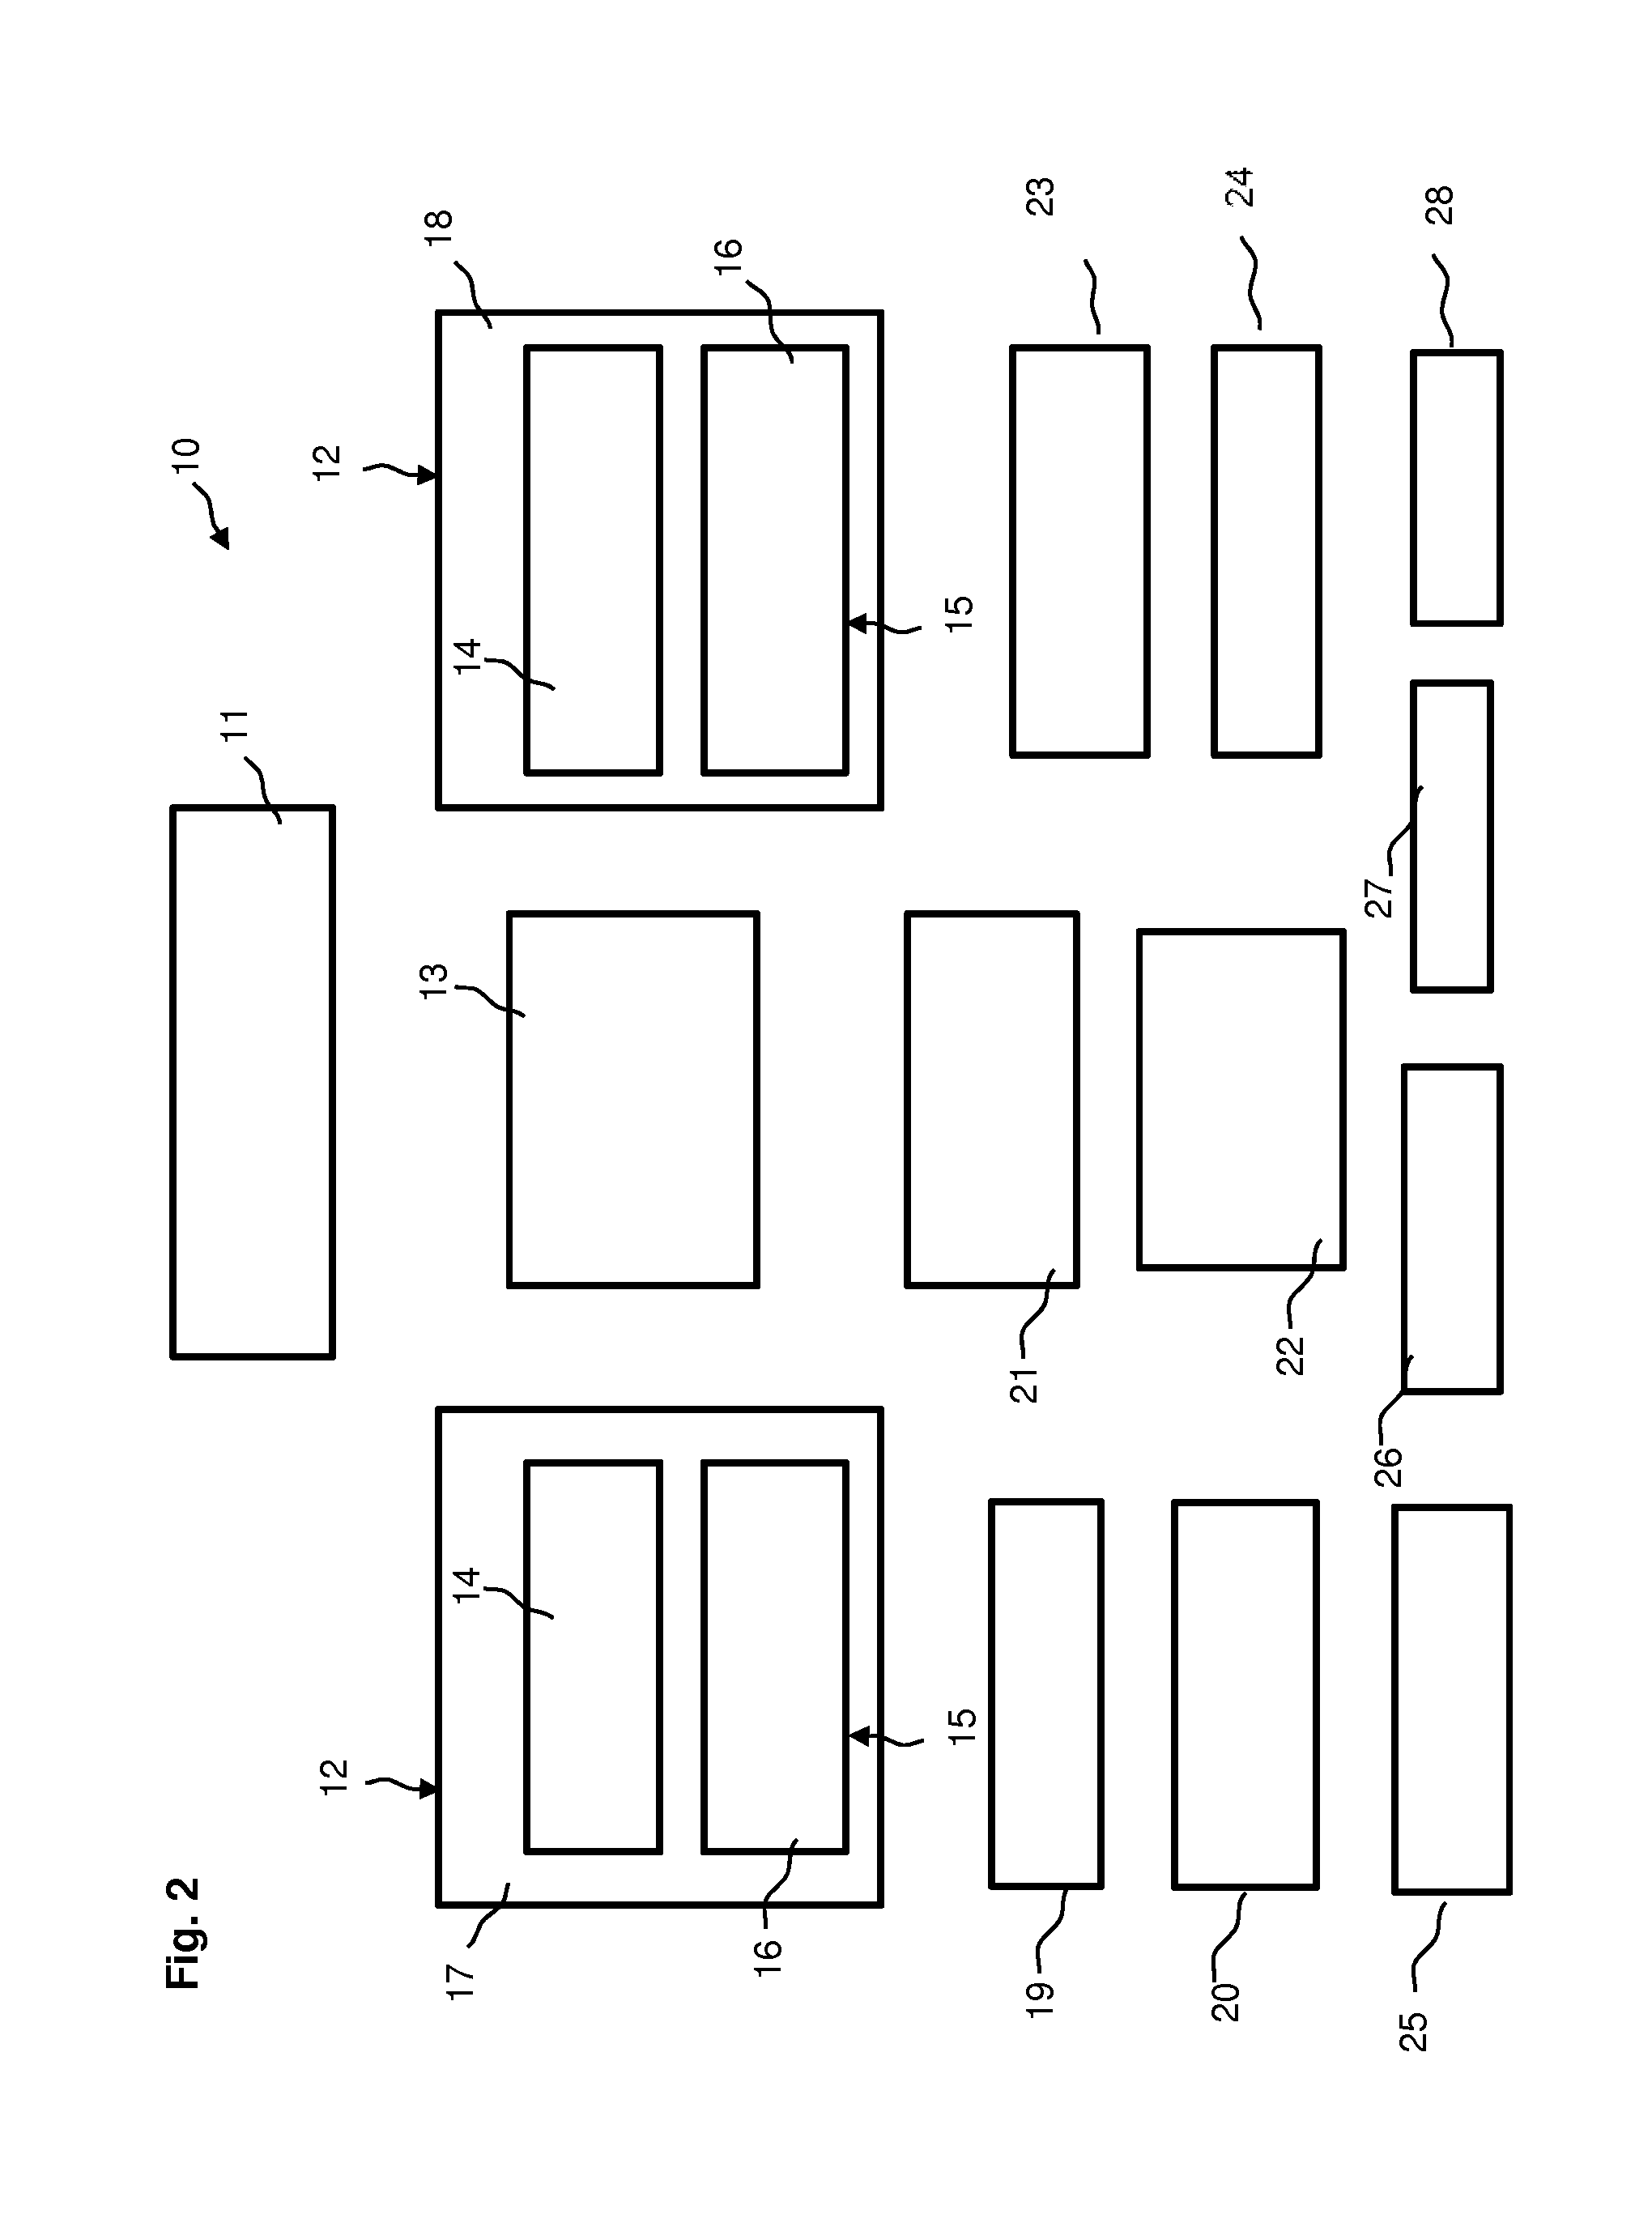 Method and System for Establishing a Self-Organized Mobile Core in a Cellular Communication Network